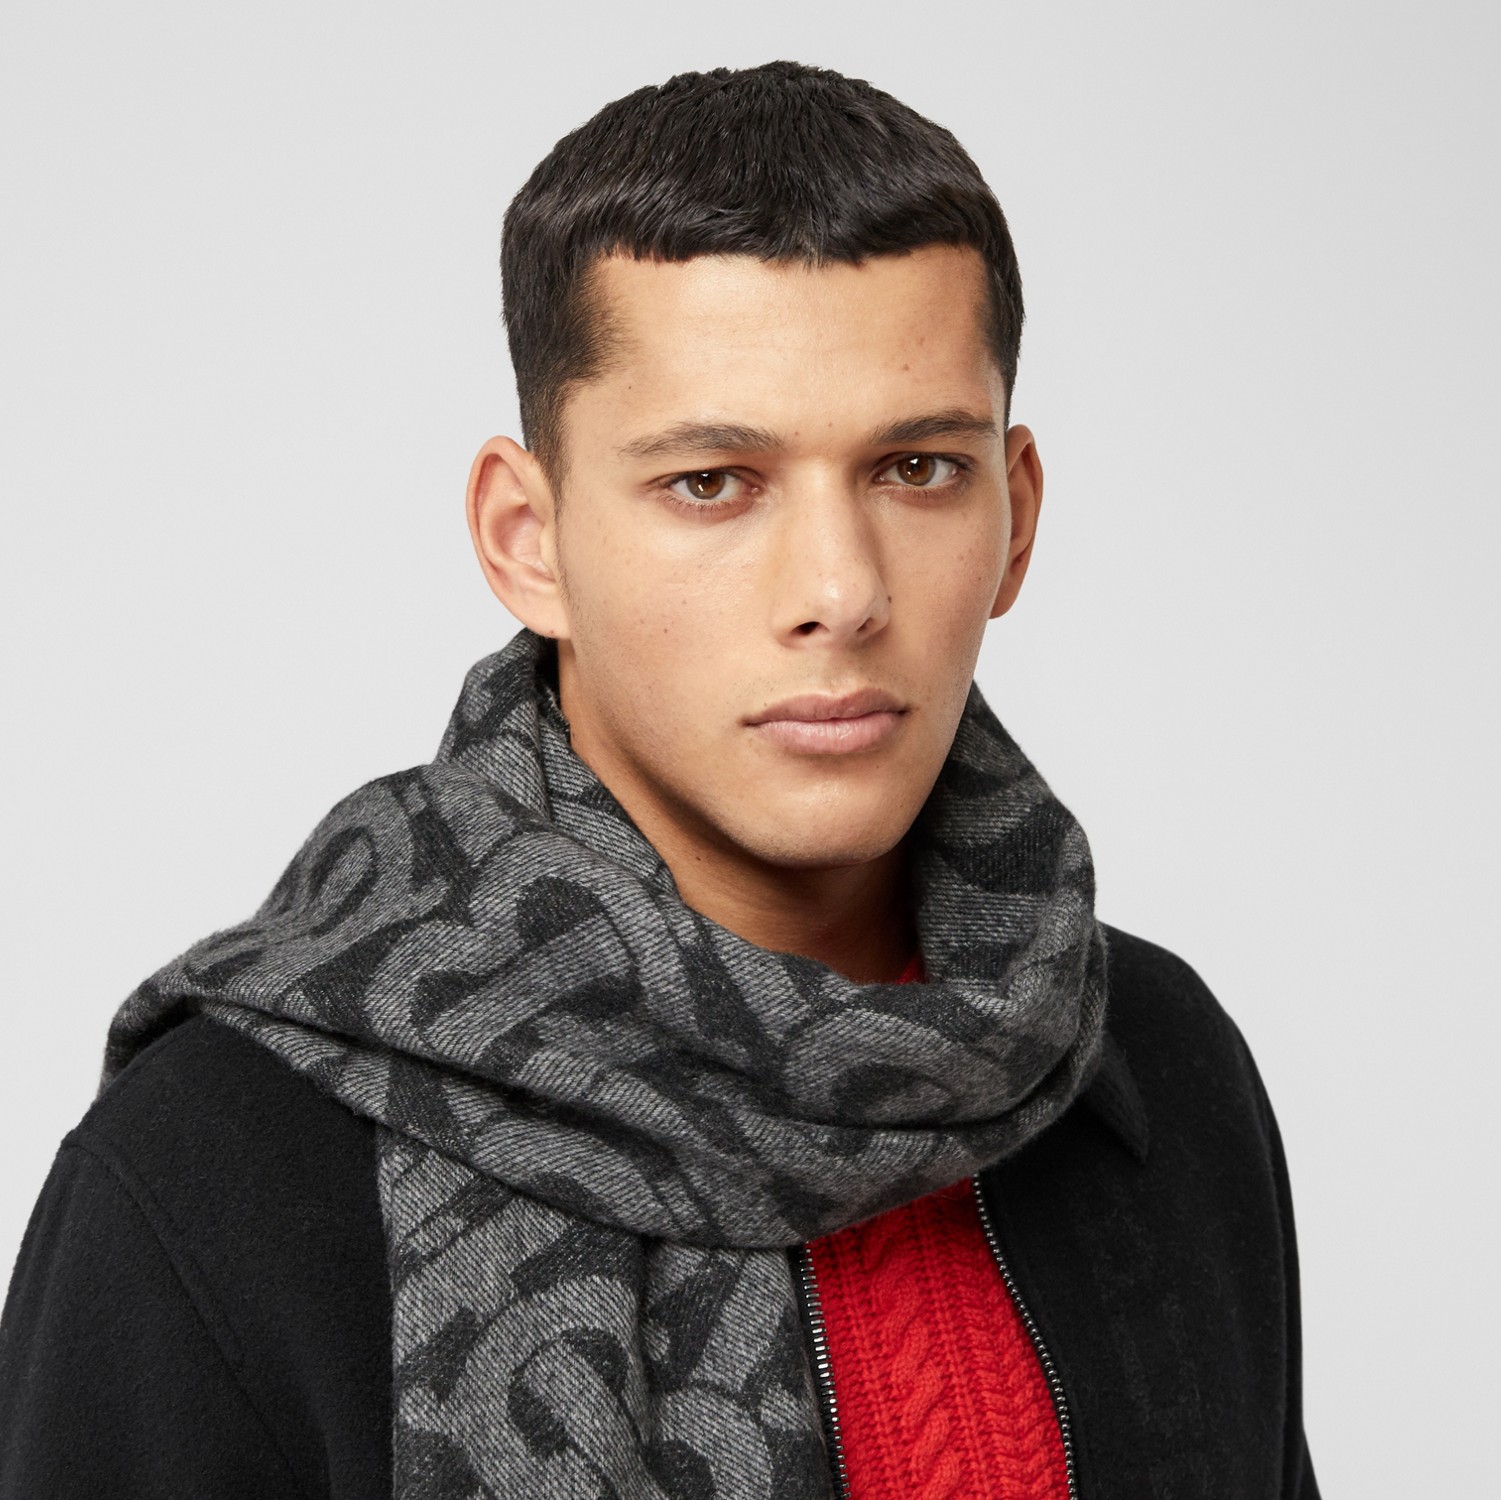 Check Cashmere Reversible Scarf